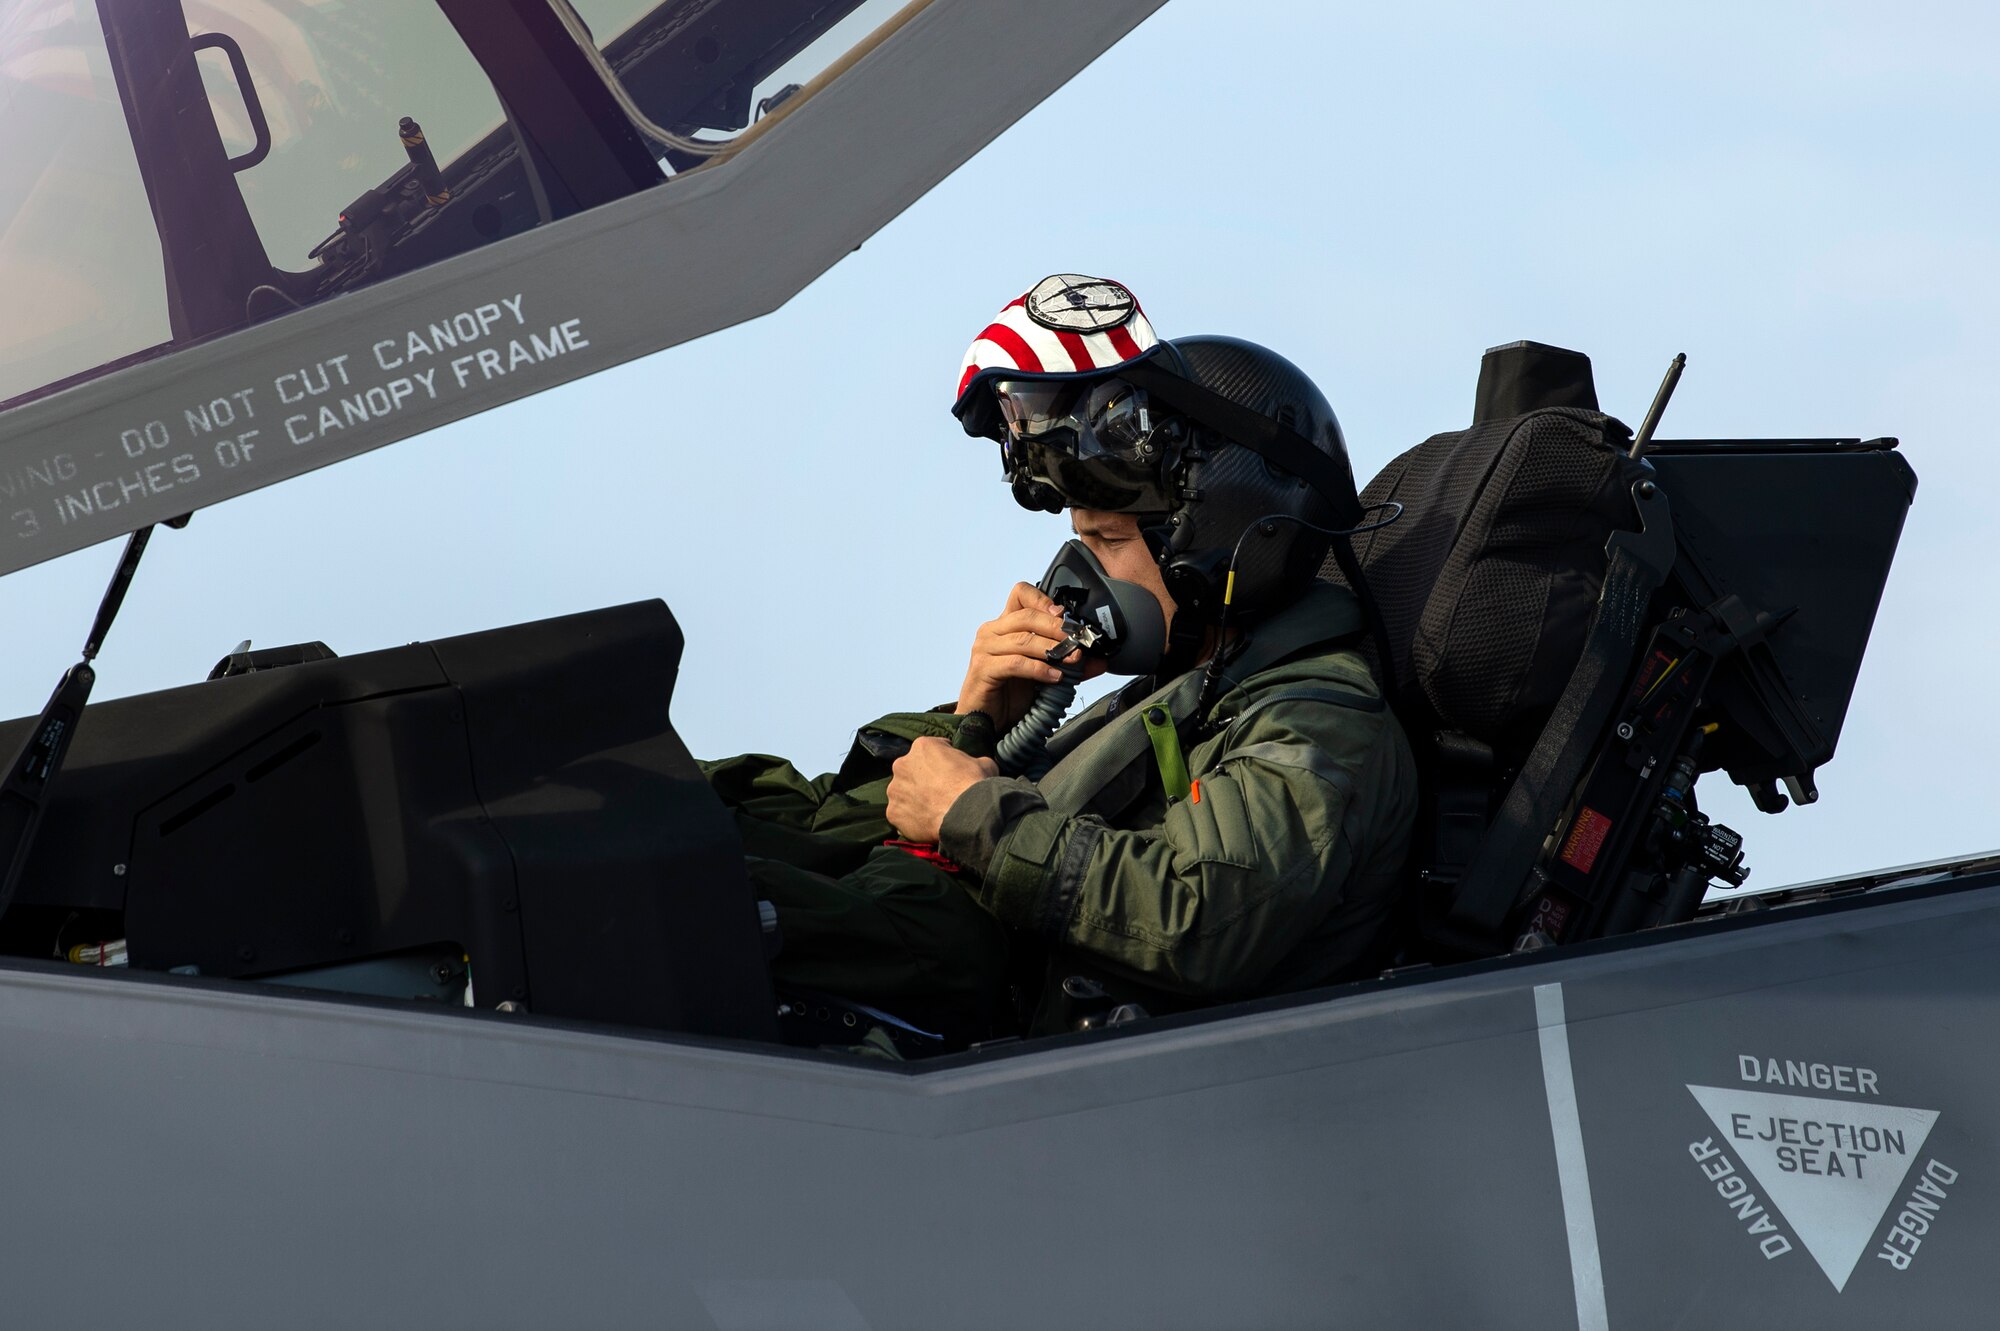 U.S. Air Force Capt. Joseph Walz, 421st Fighter Squadron F-35A Lightning II pilot, prepares to taxi during Operation Rapid Forge at Spangdahlem Air Base, Germany, July 18, 2019. The goal of the operation is to enhance interoperability with NATO allies and partners to improve combined operational capabilities. F-35s provide unmatched lethality, survivability, and adaptability to war-fighter aircraft. (U.S. Air Force photo by Airman 1st Class Valerie Seelye)